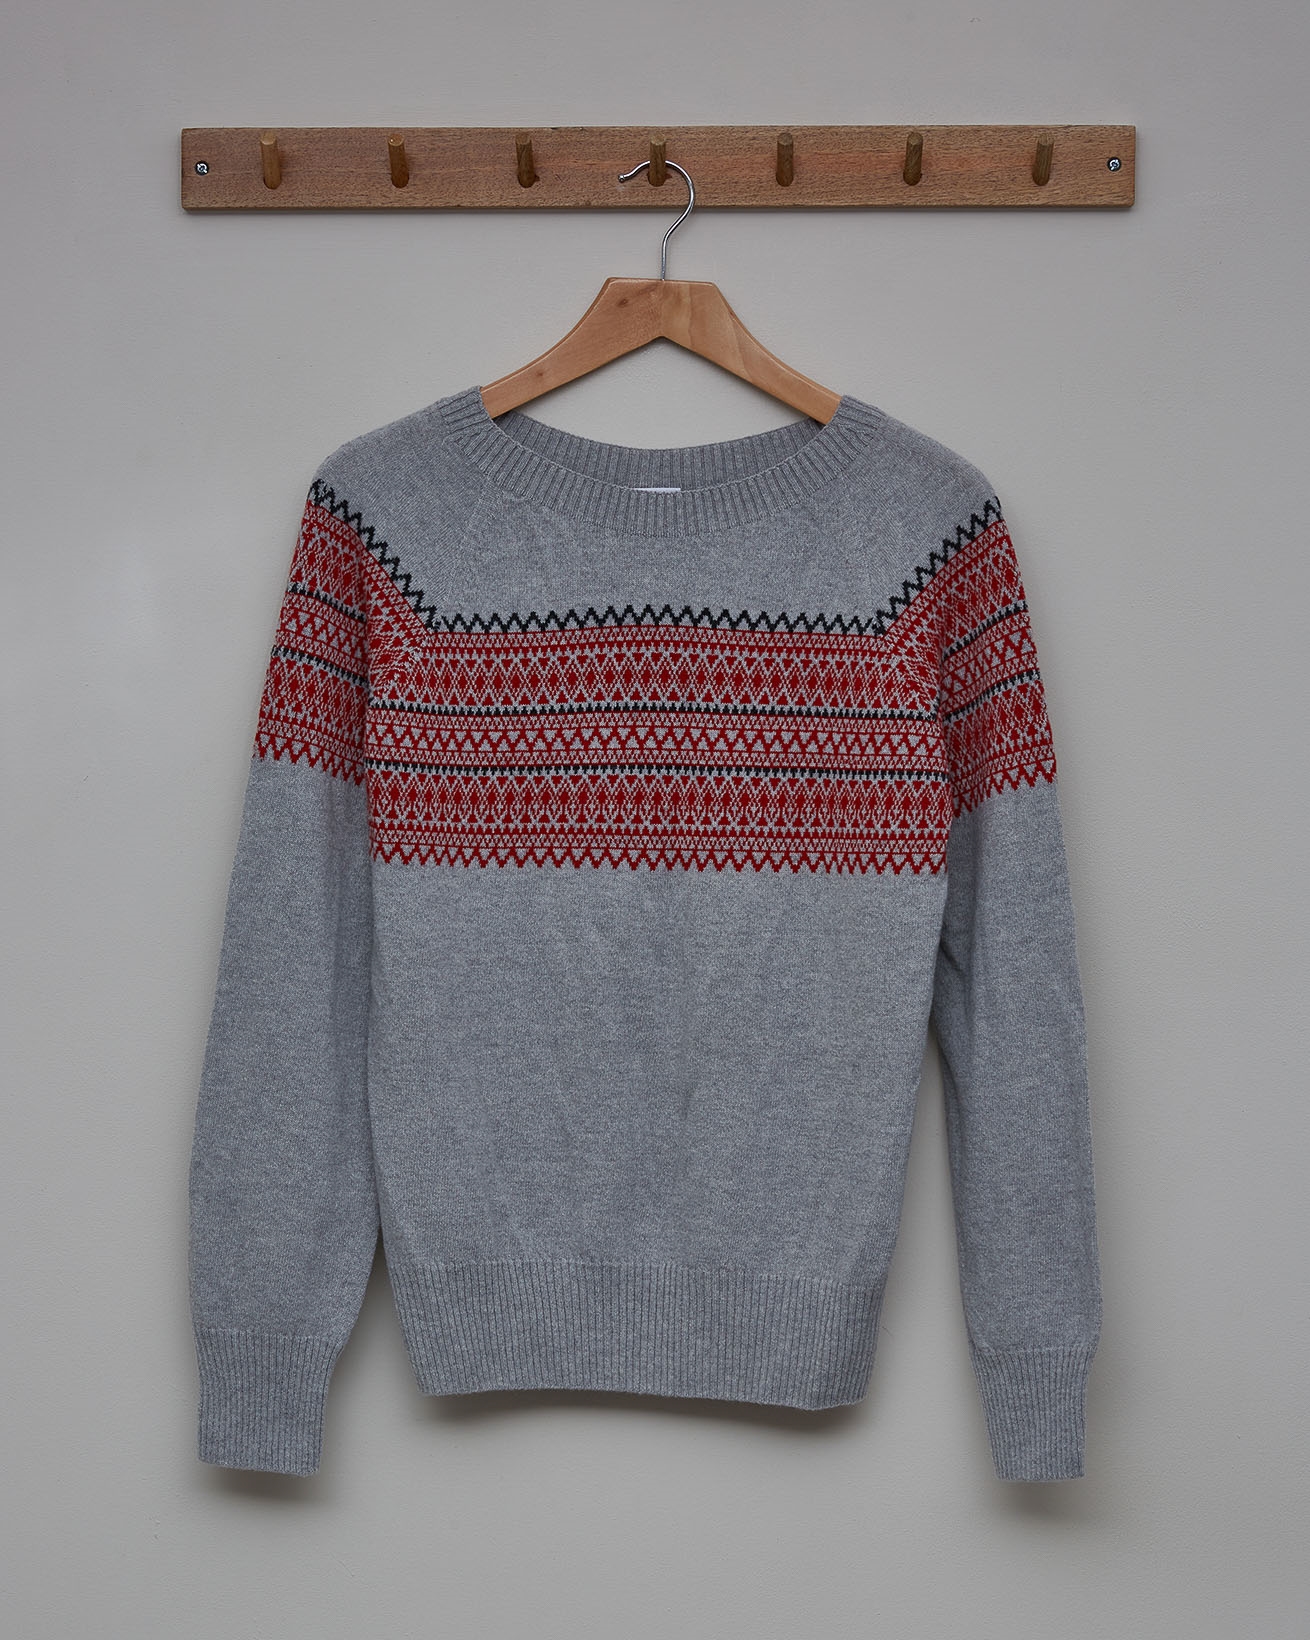 Supersoft Crew Neck Jumper - Size Small - Fossil Pillarbox Red Fairisle